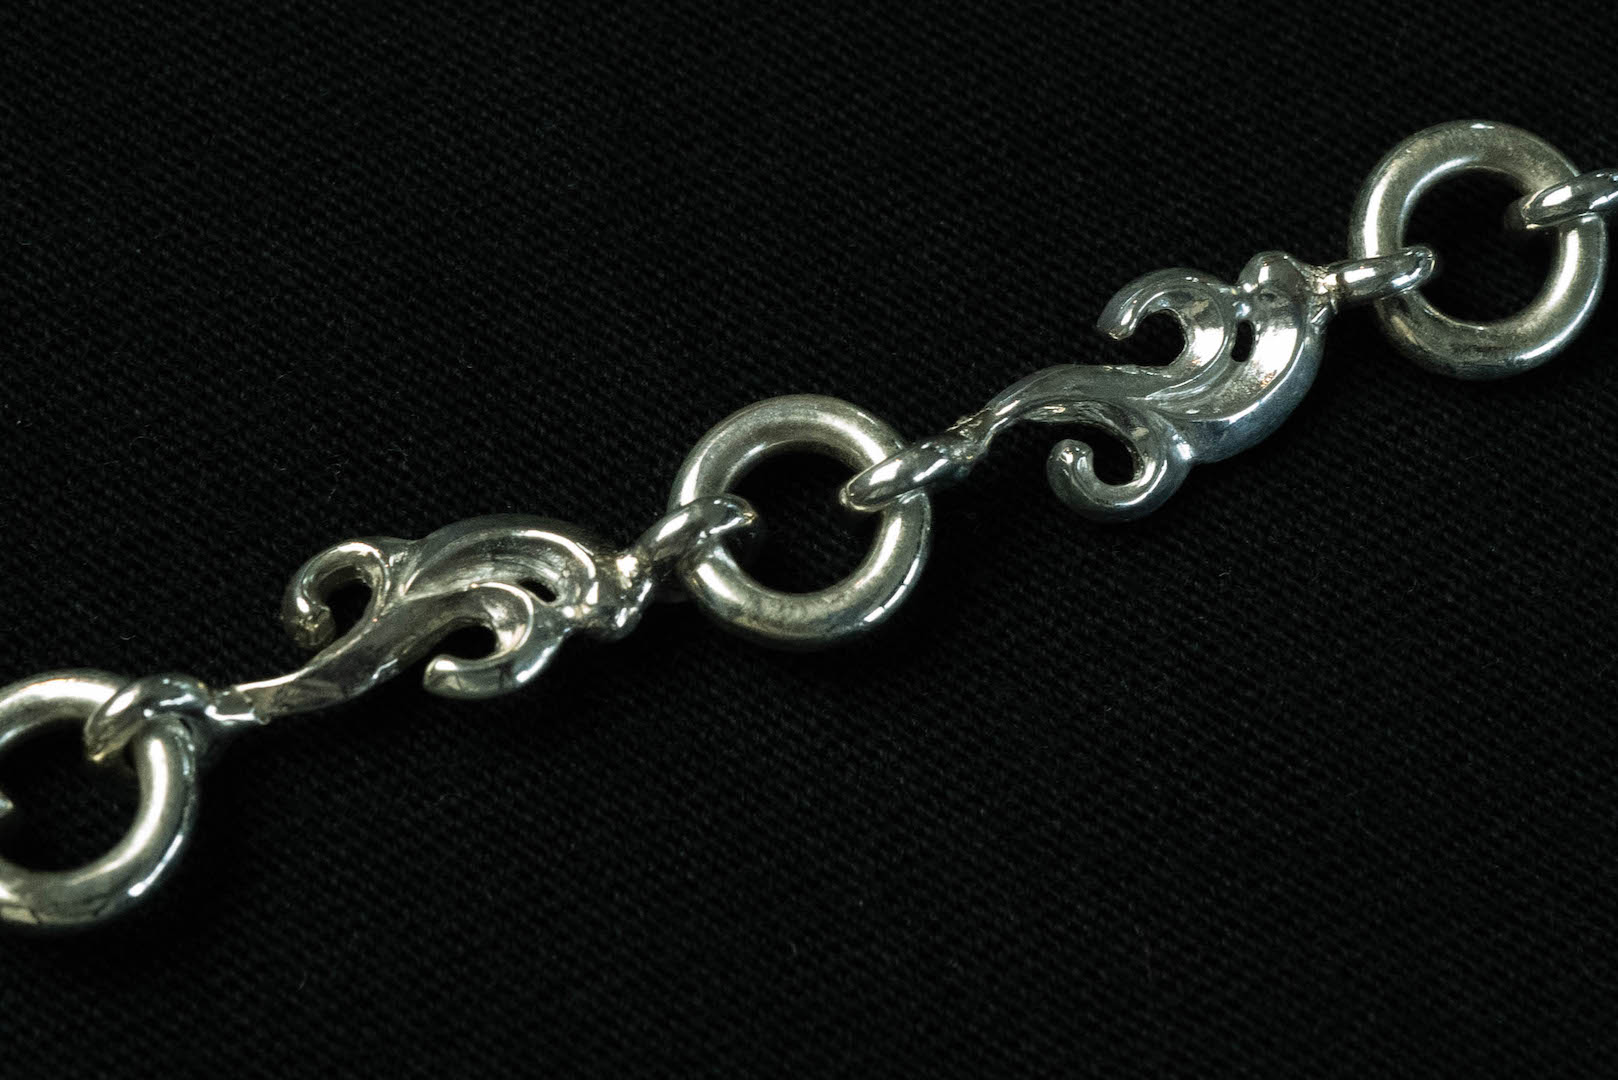 First Arrow's Customised "Ultimate Luxe" Arabesque Silver Chain (P-023)